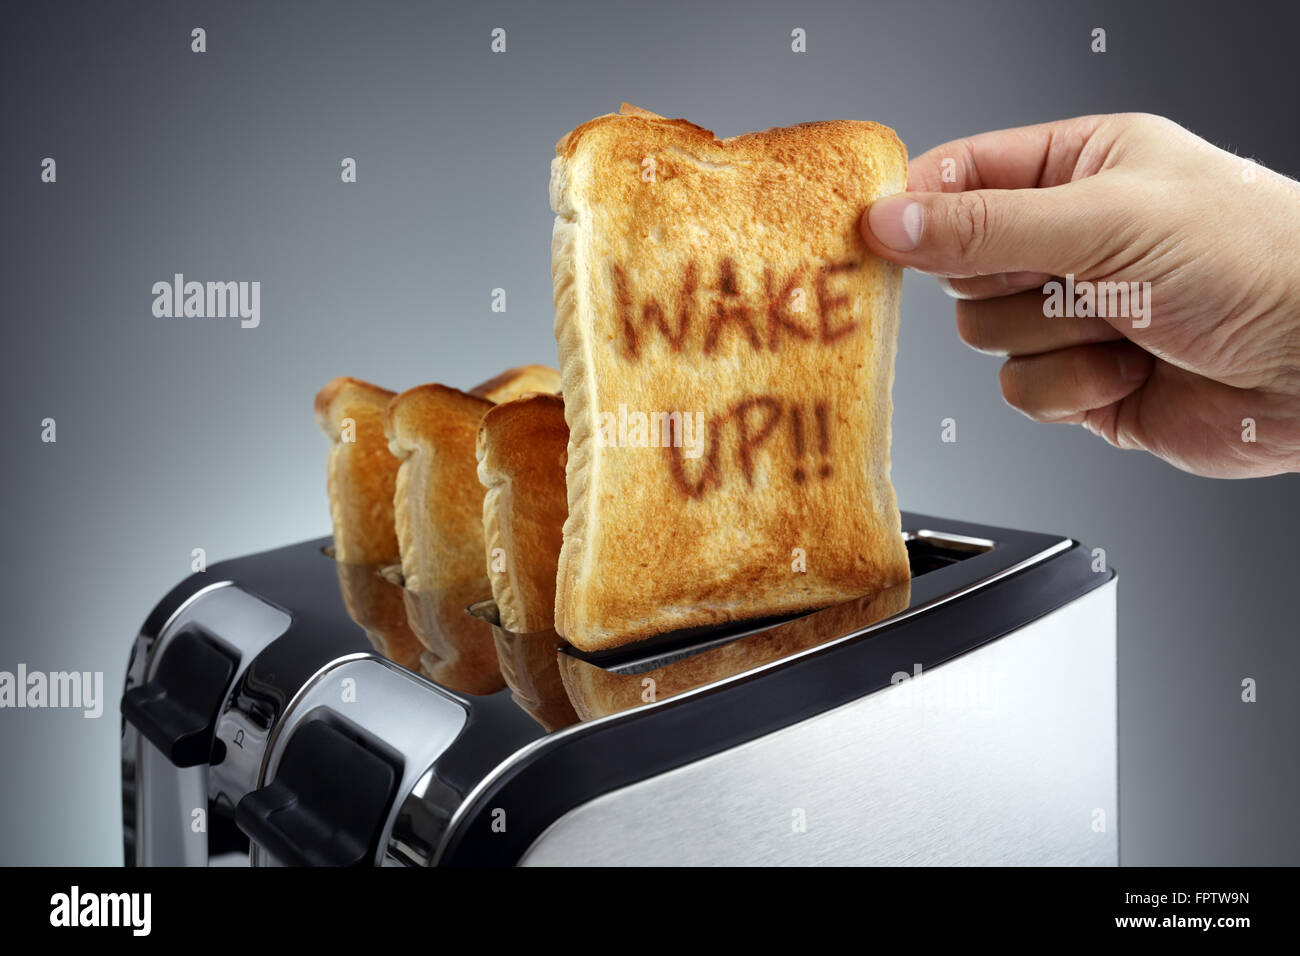 Good morning wake up toasted bread slice in a toaster, motivation to get started Stock Photo